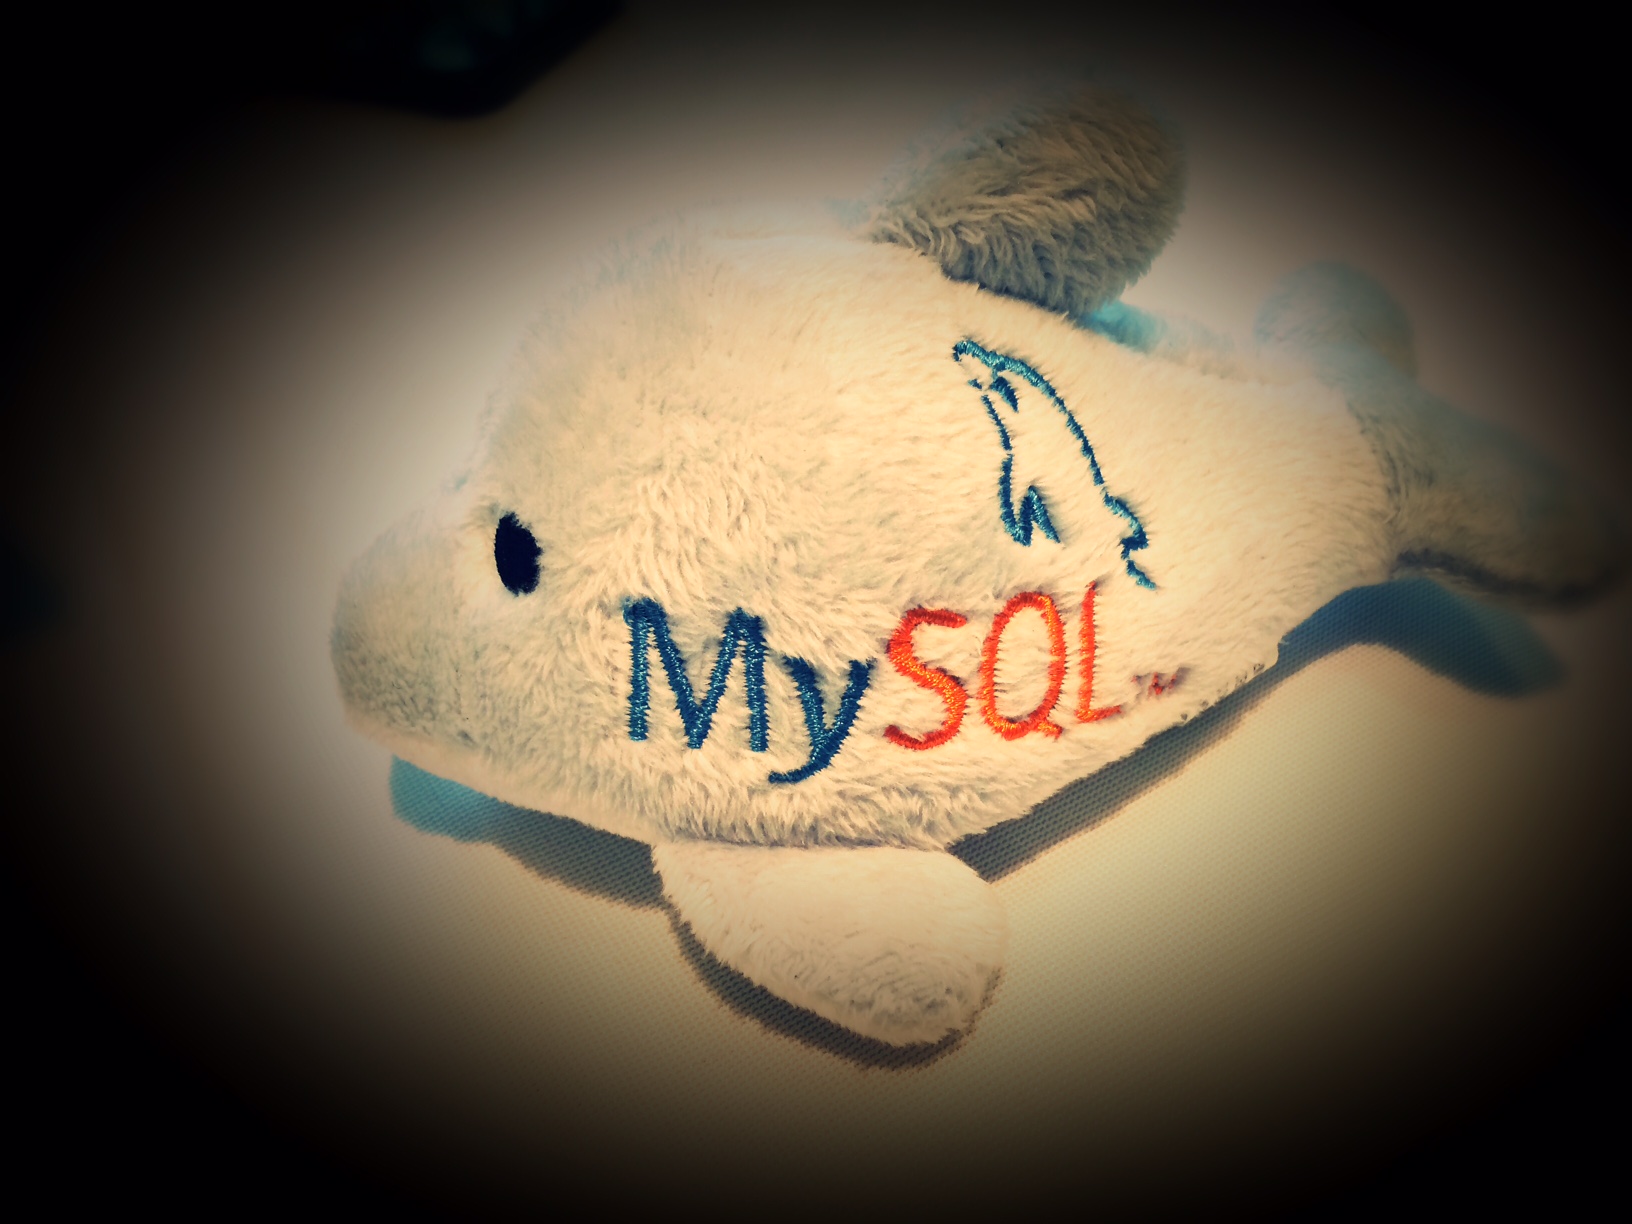 Howto make MySQL point-in-time recovery faster ?